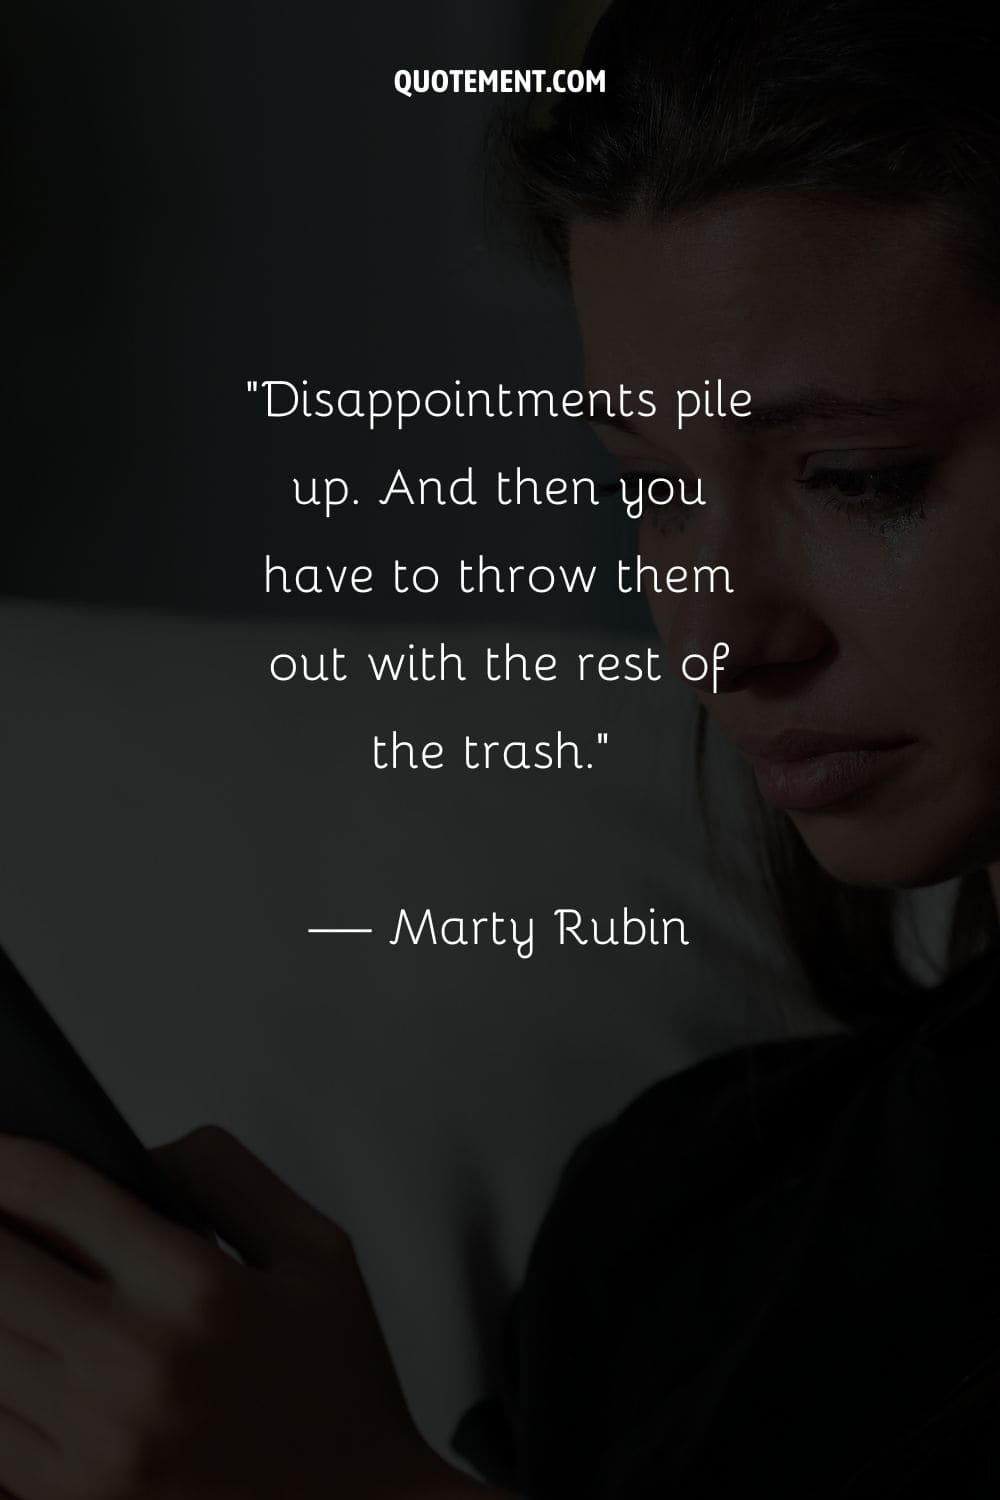 Disappointments pile up. And then you have to throw them out with the rest of the trash.